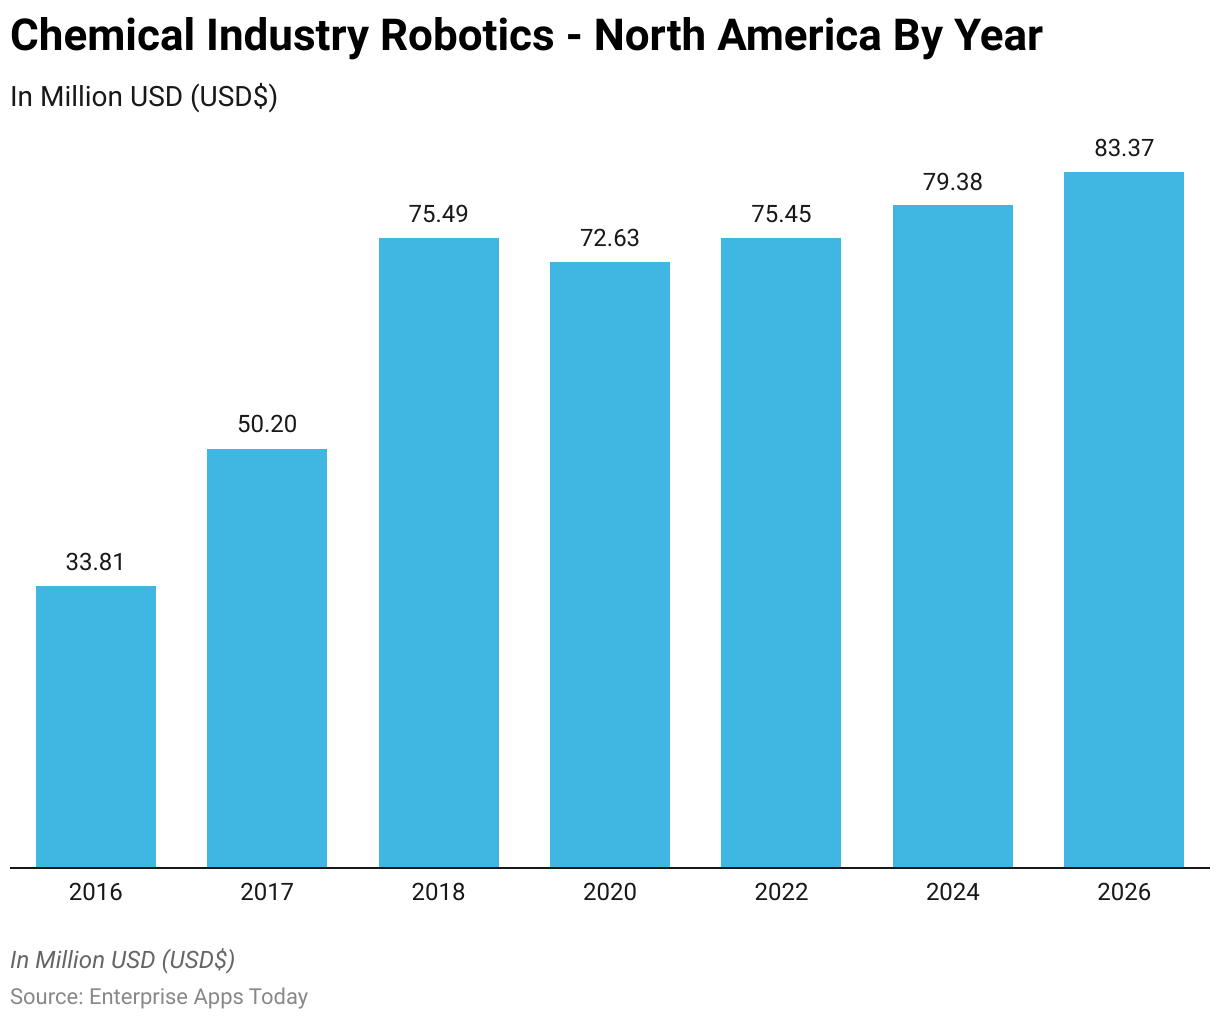 Chemical Industry Robotics - North America By Year 